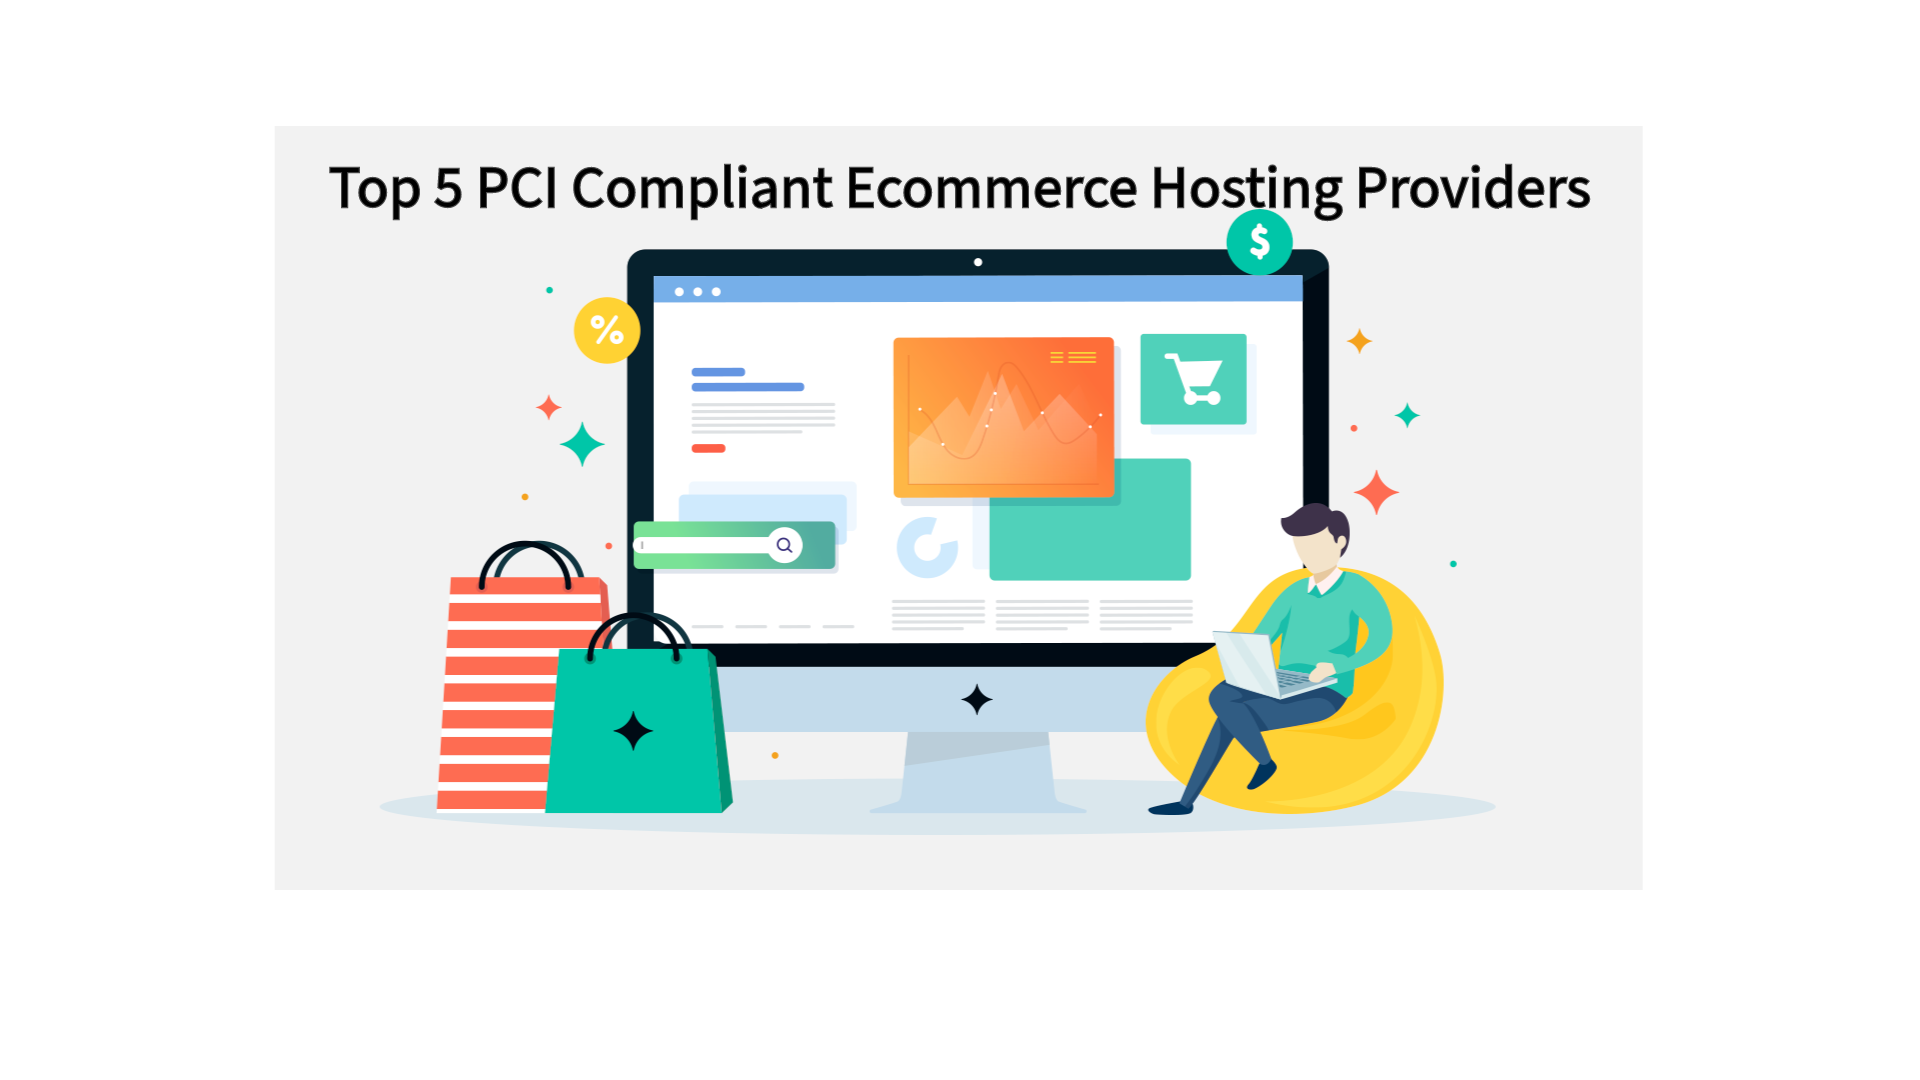 Top 5 PCI Compliant Ecommerce Hosting Services Providers